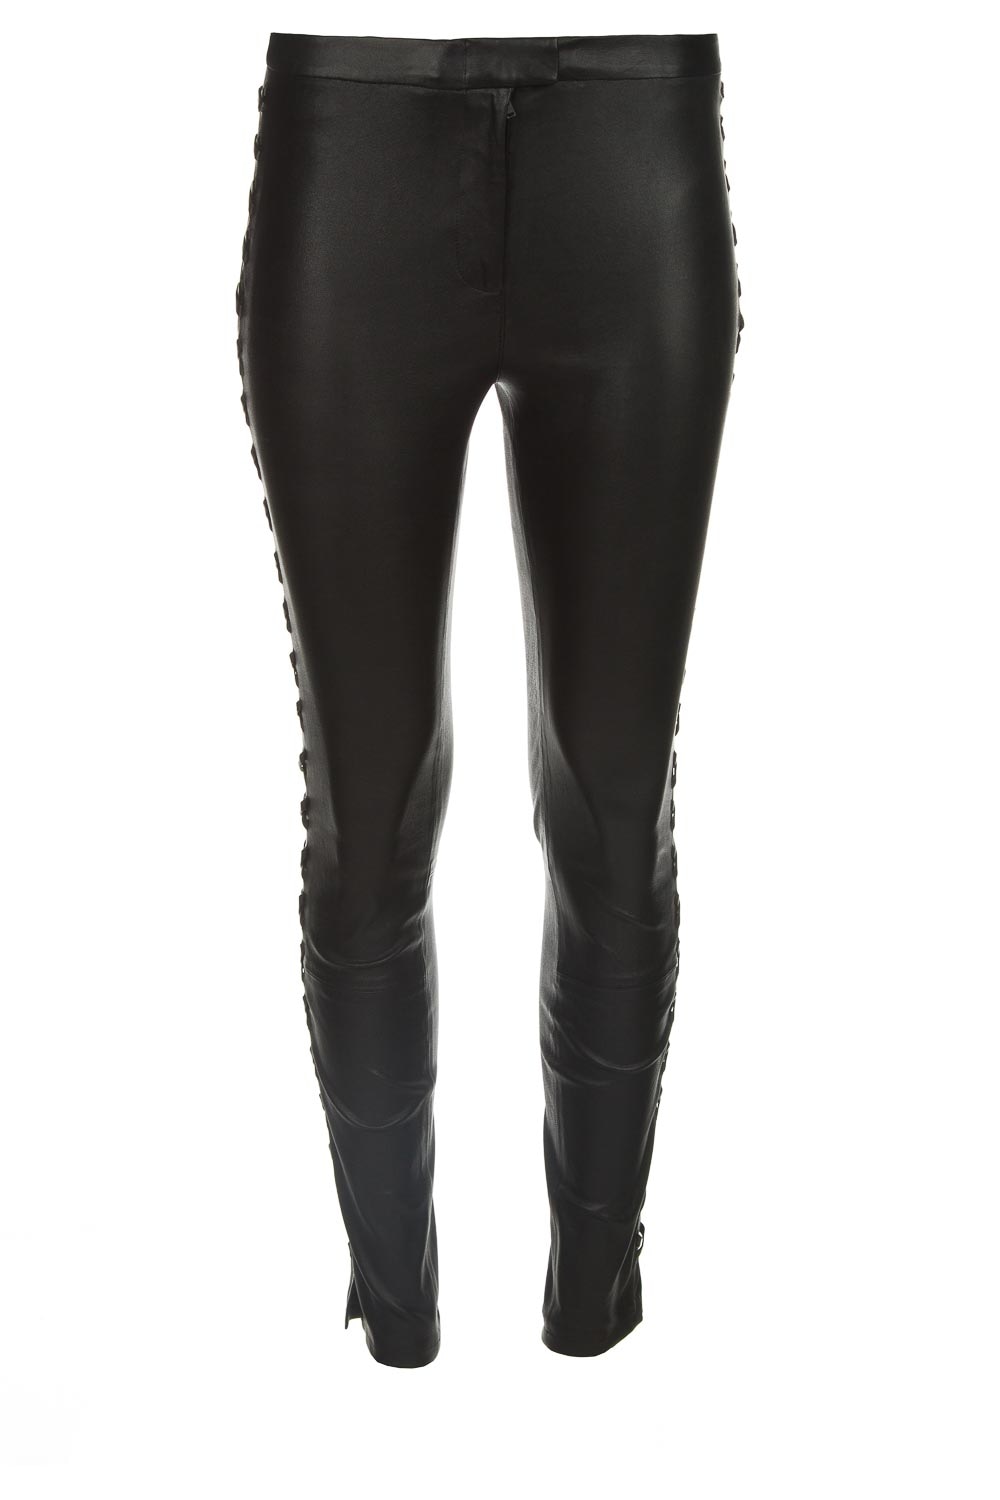 leather pants with lace up sides